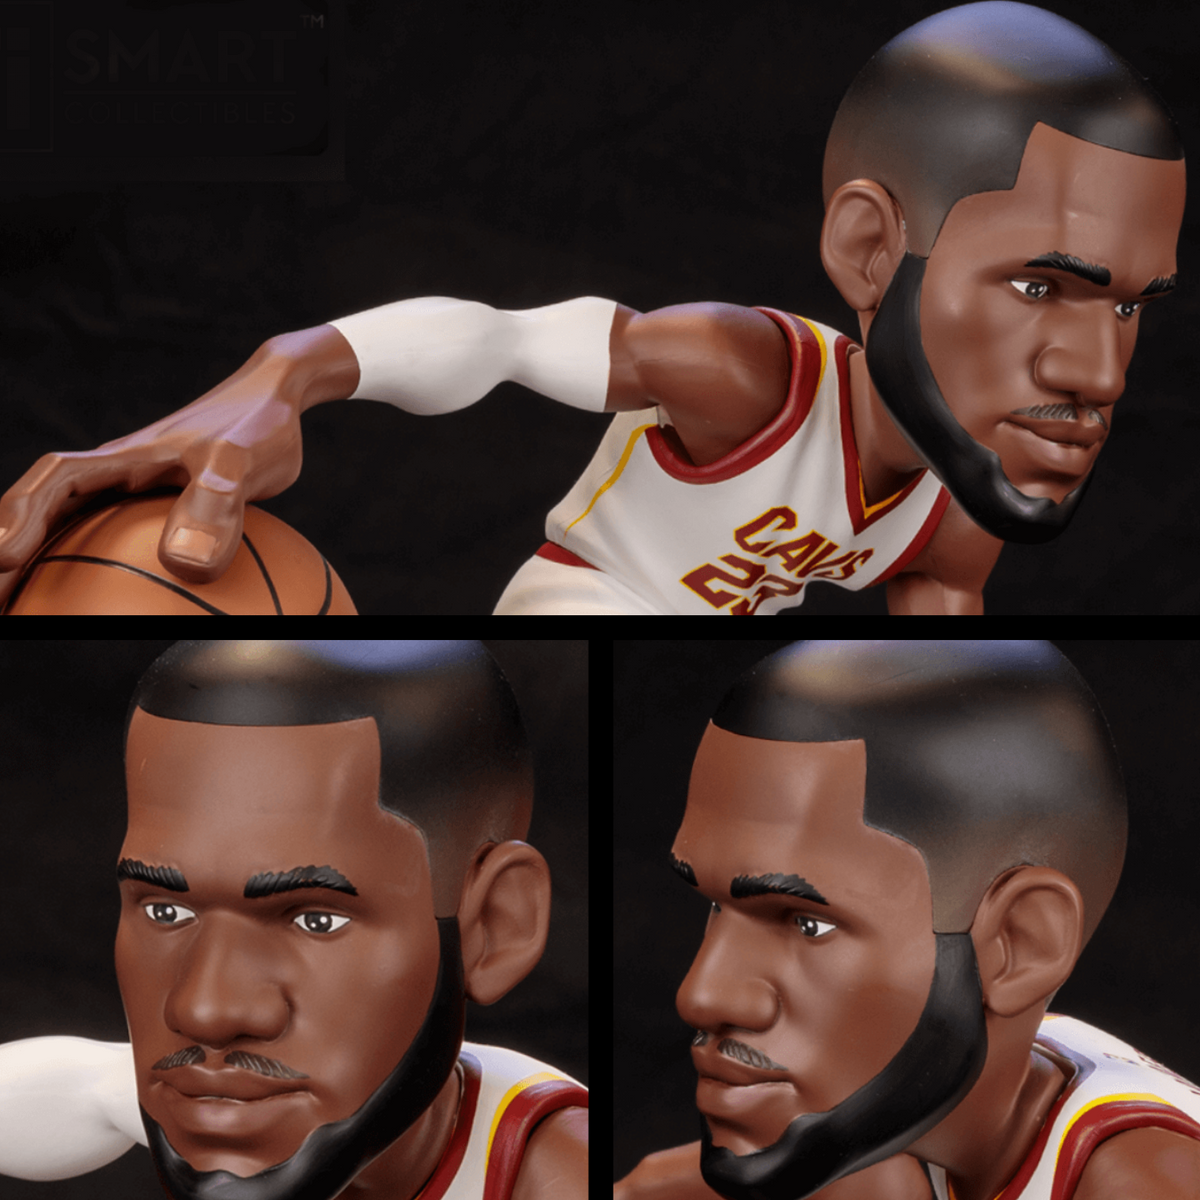 LeBron James Collectibles: Limited Edition Cavaliers' smALL-STARS